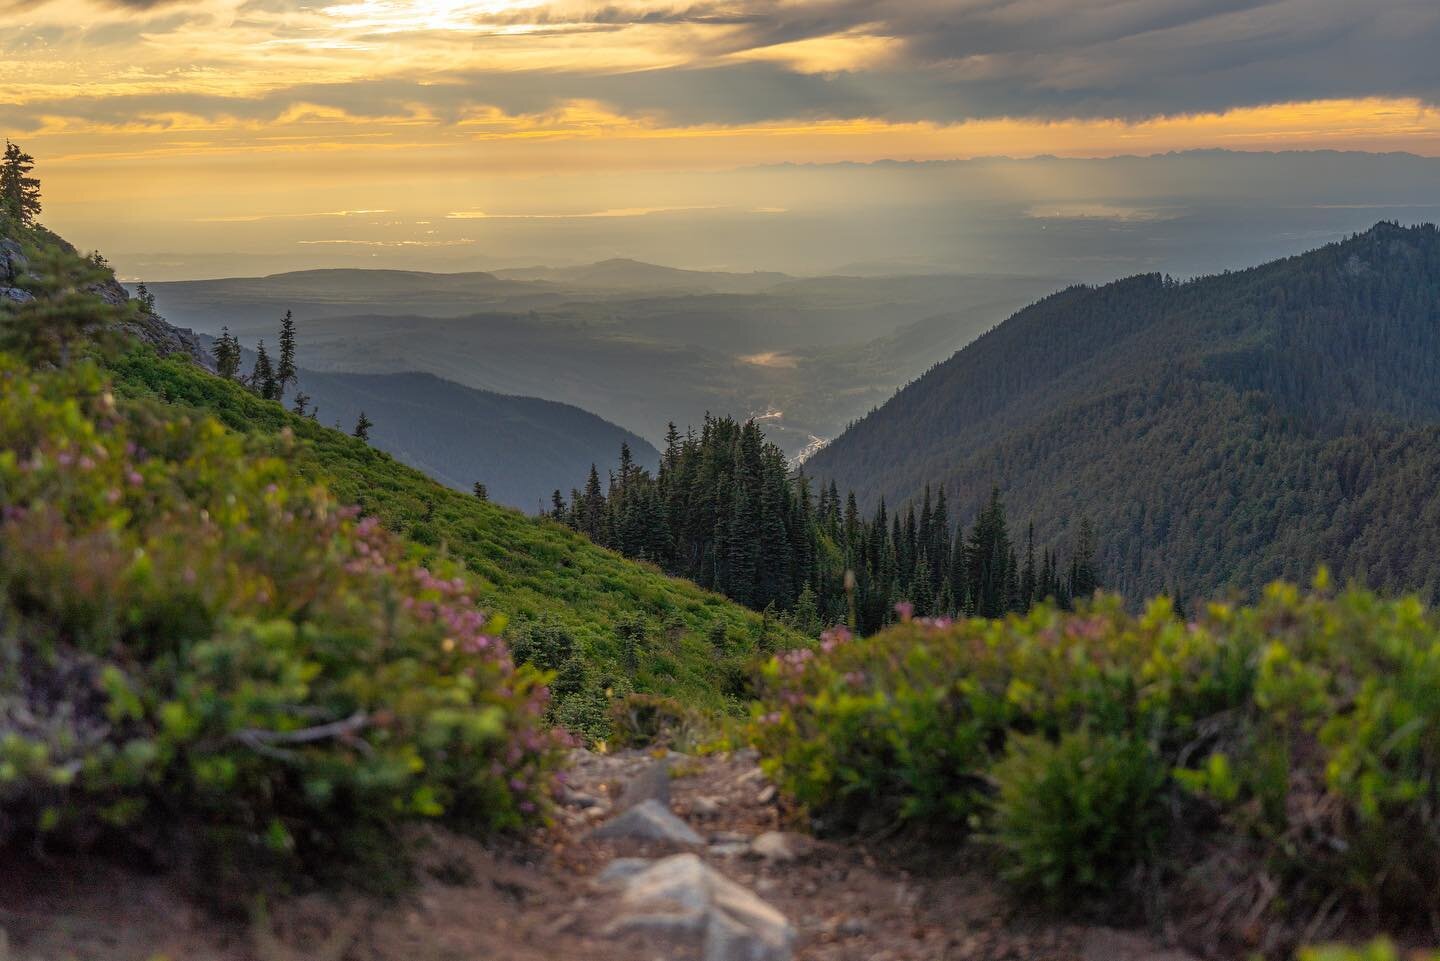 86,400 seconds in a day&mdash;how do you make the most of those meaningful moments? For me, mountain time is never wasted.
.
Sunset hike to Tolmie Peak Fire Lookout in Mount Rainier National Park last month clearly did not disappoint. I mean, views o